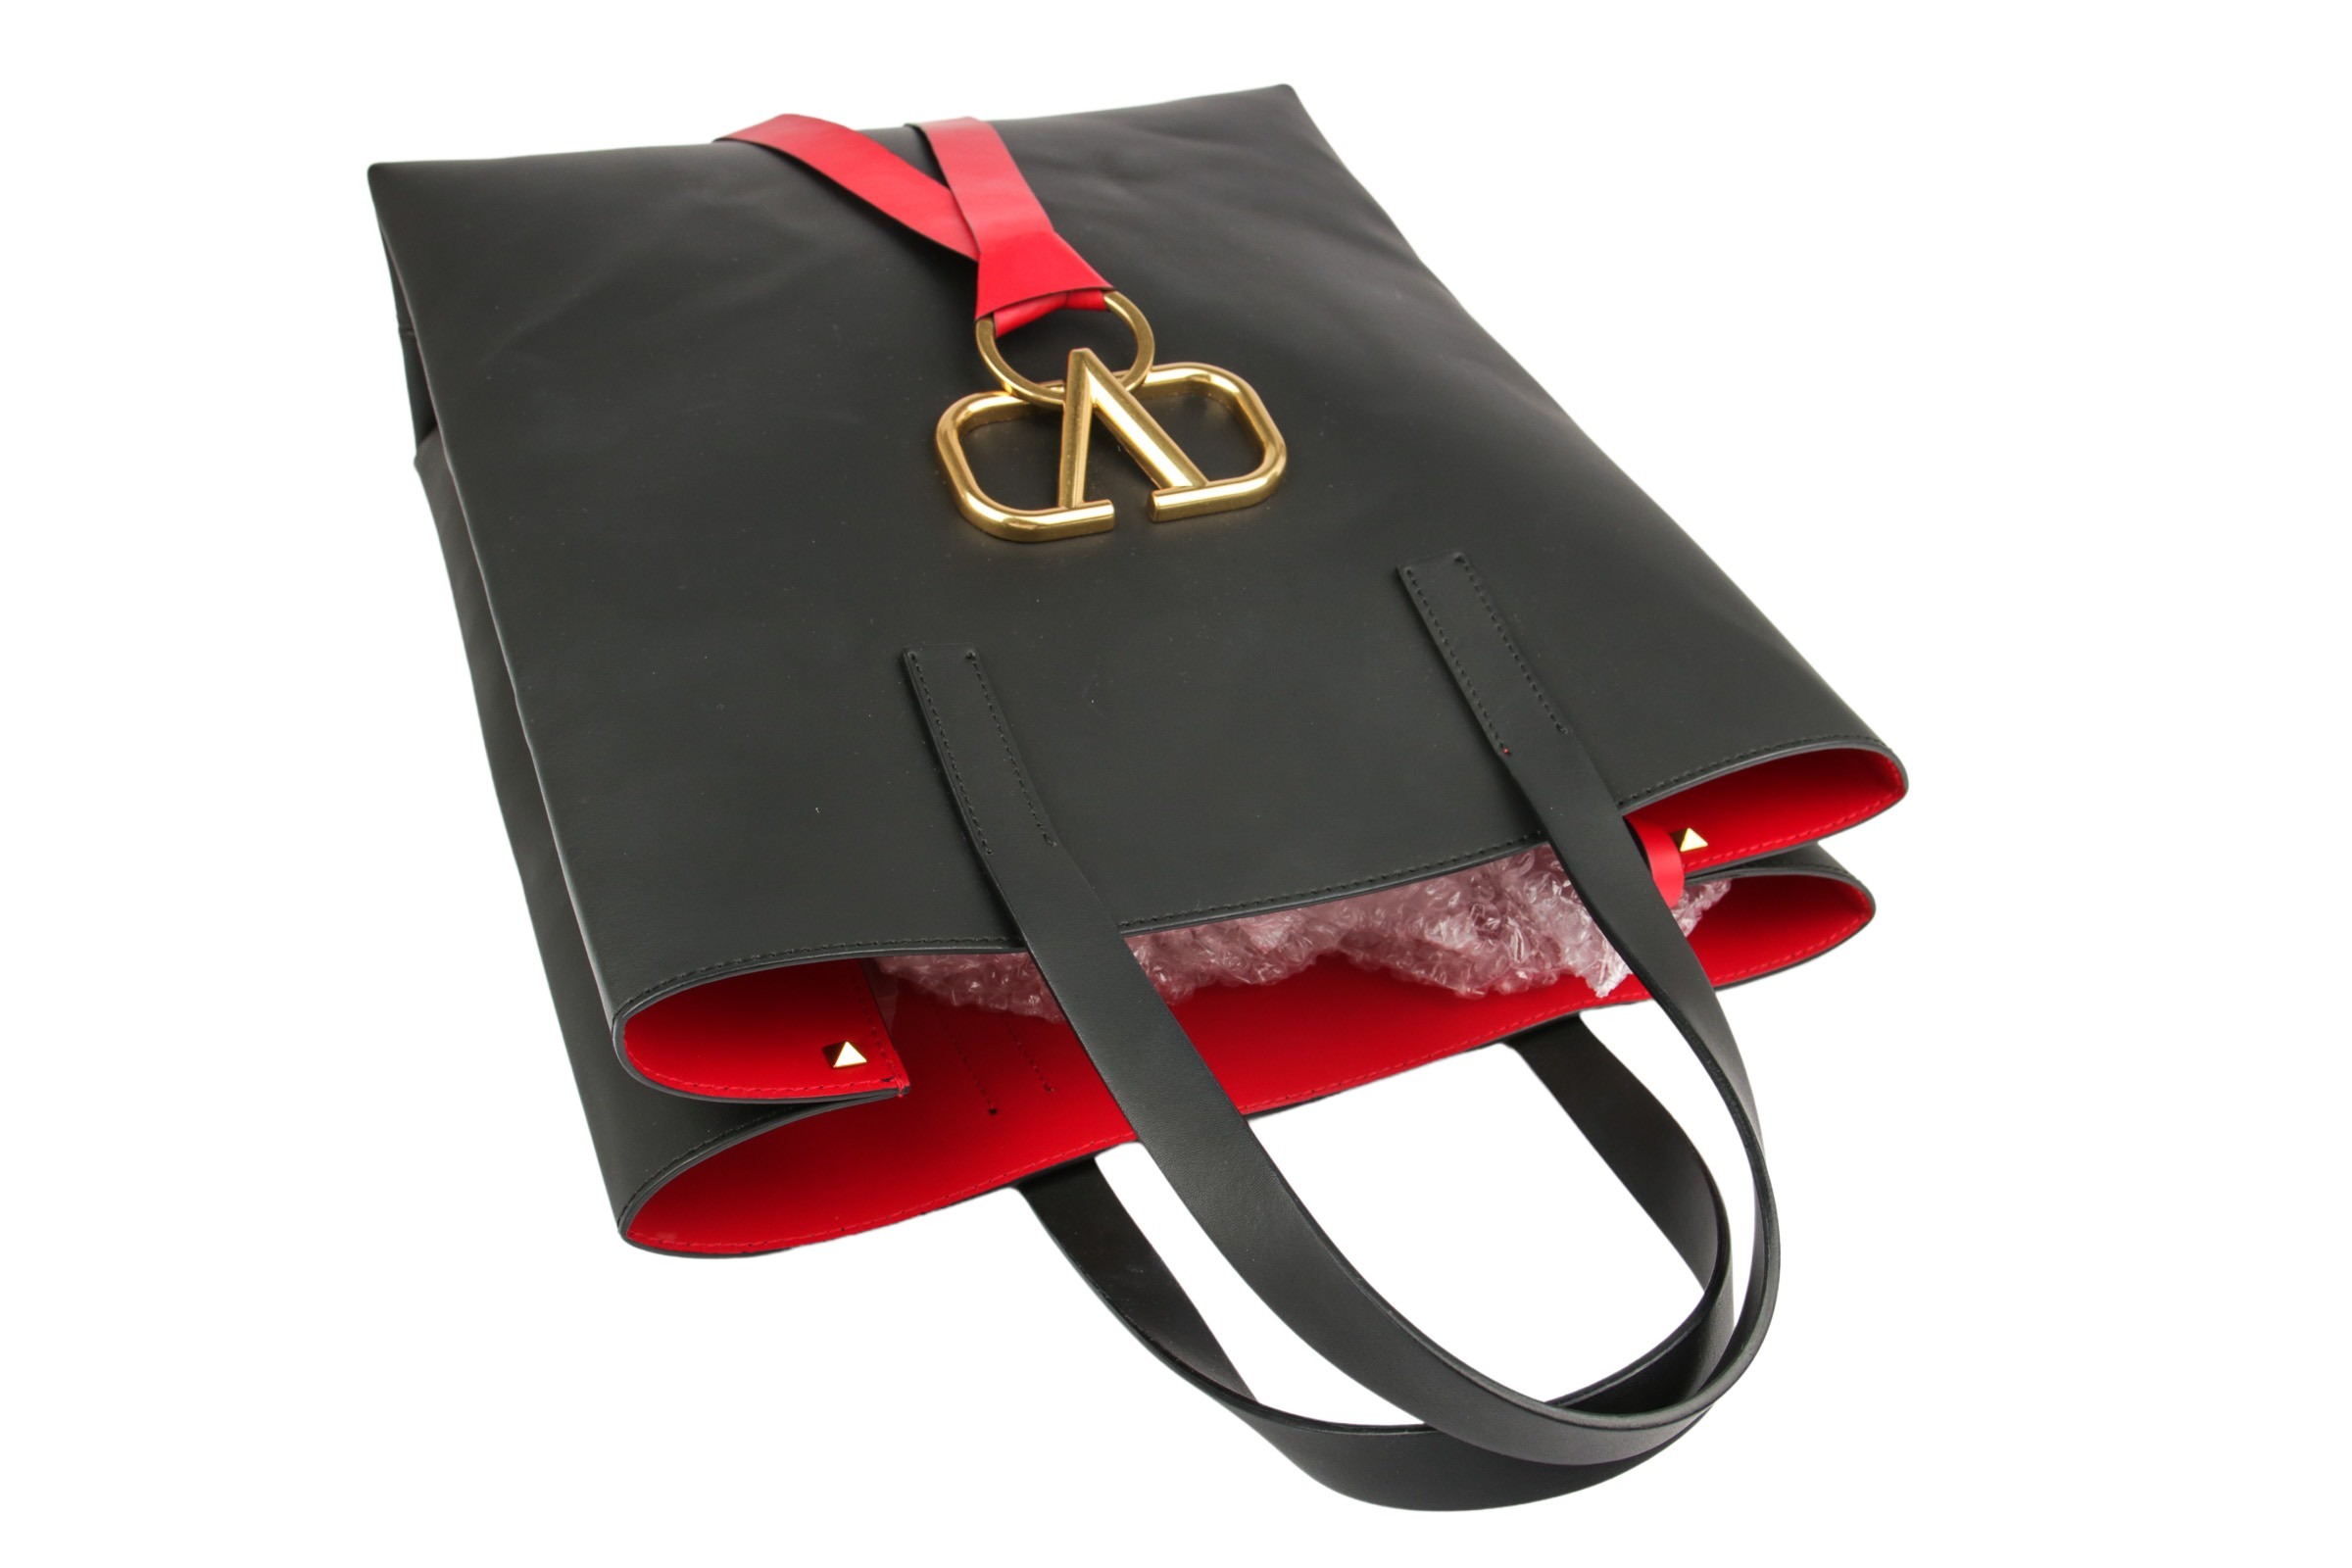 V Ring Tote Wine - Corîu - Leather Bags